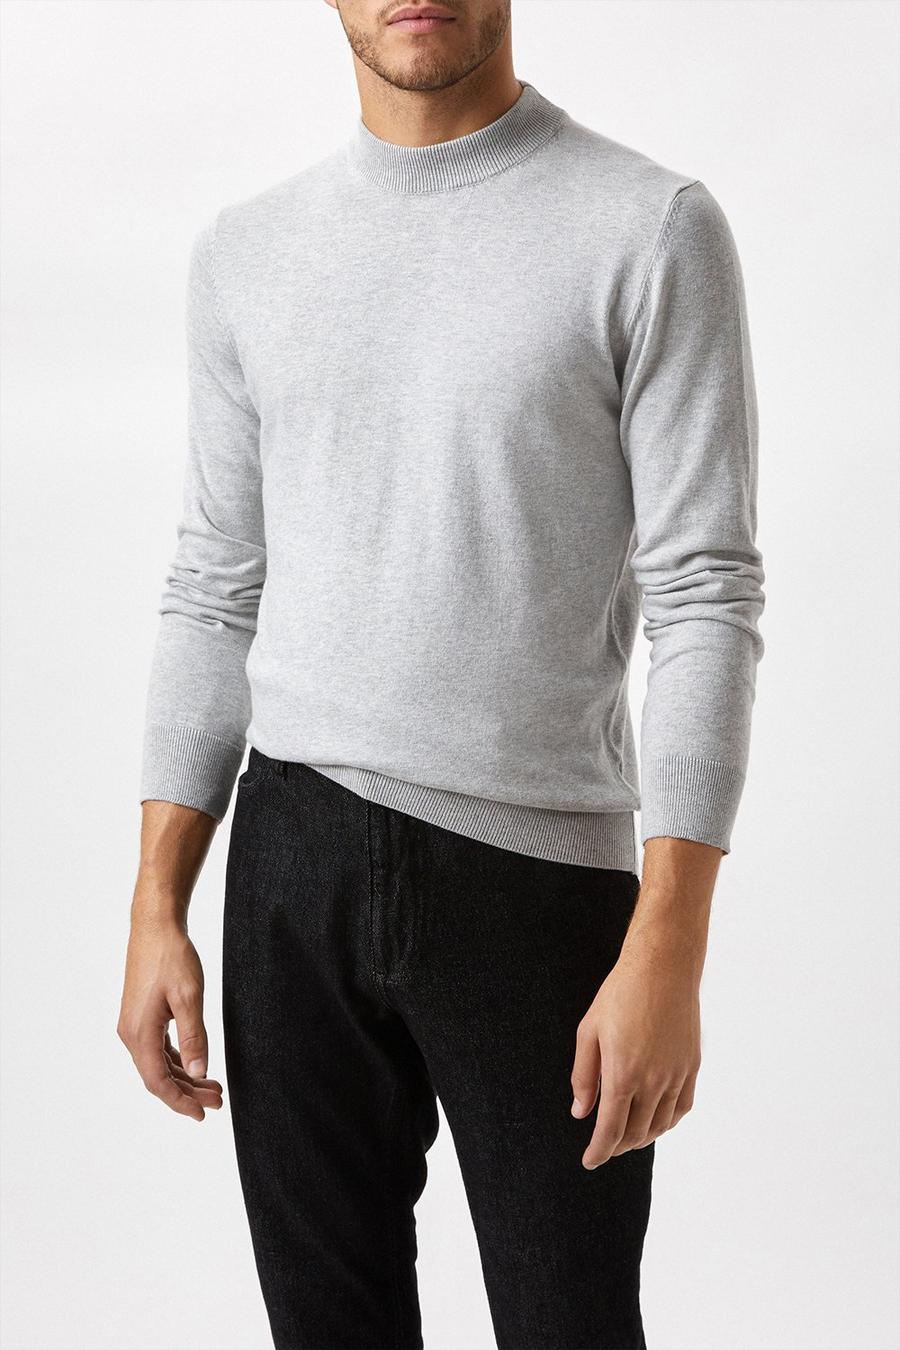 C&A jumper discount 80% MEN FASHION Jumpers & Sweatshirts Knitted Gray L 